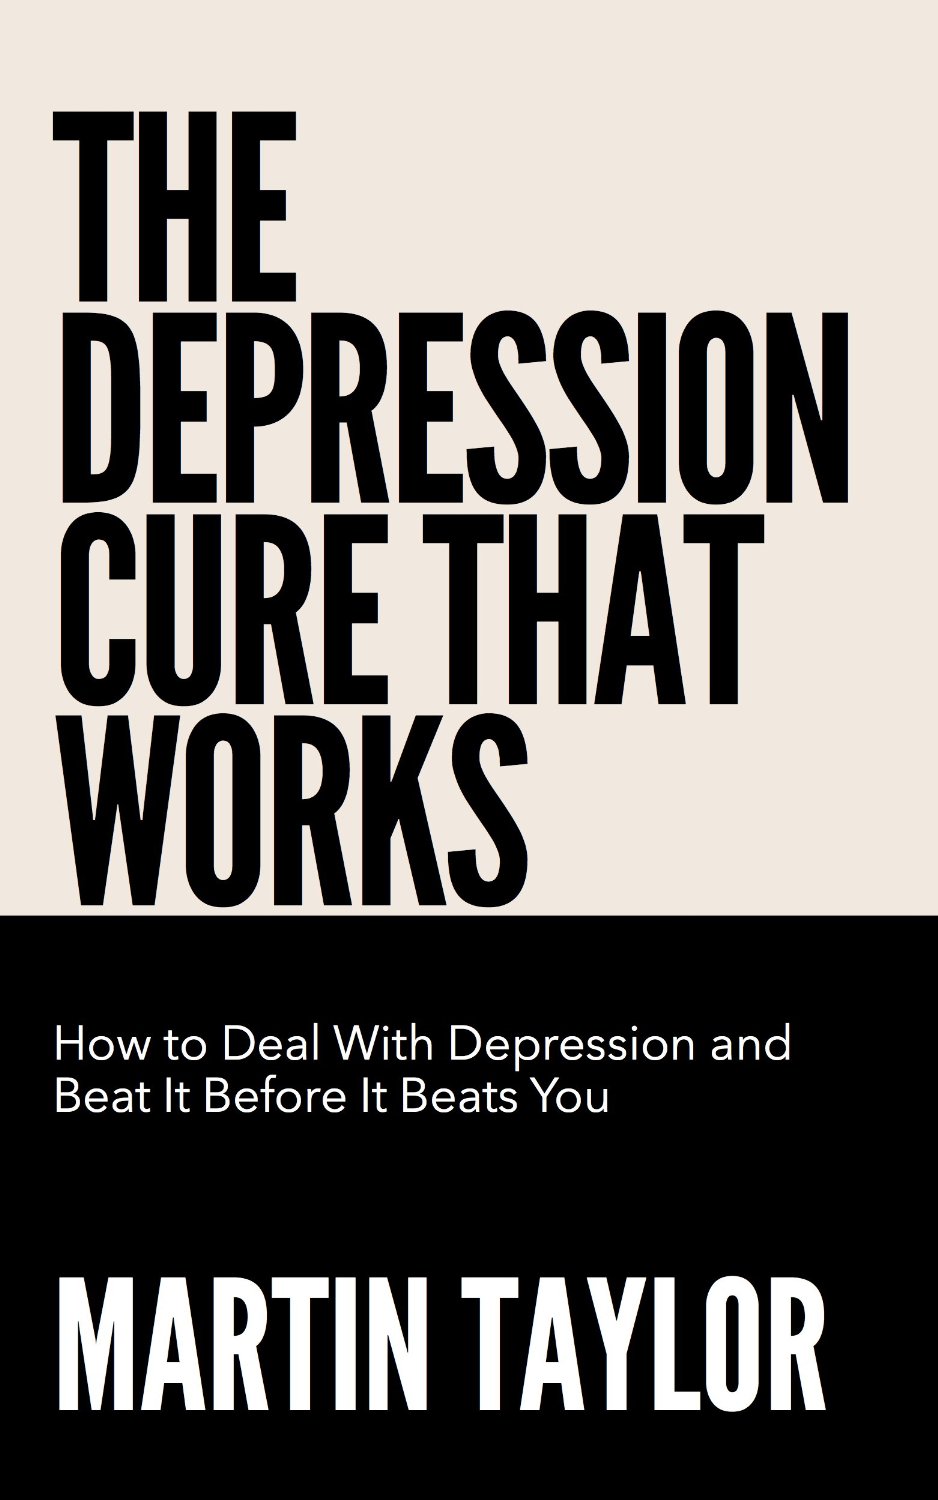 The Depression Cure That Works: How To Deal With Depression and Beat It Before It Beats You by Martin Taylor